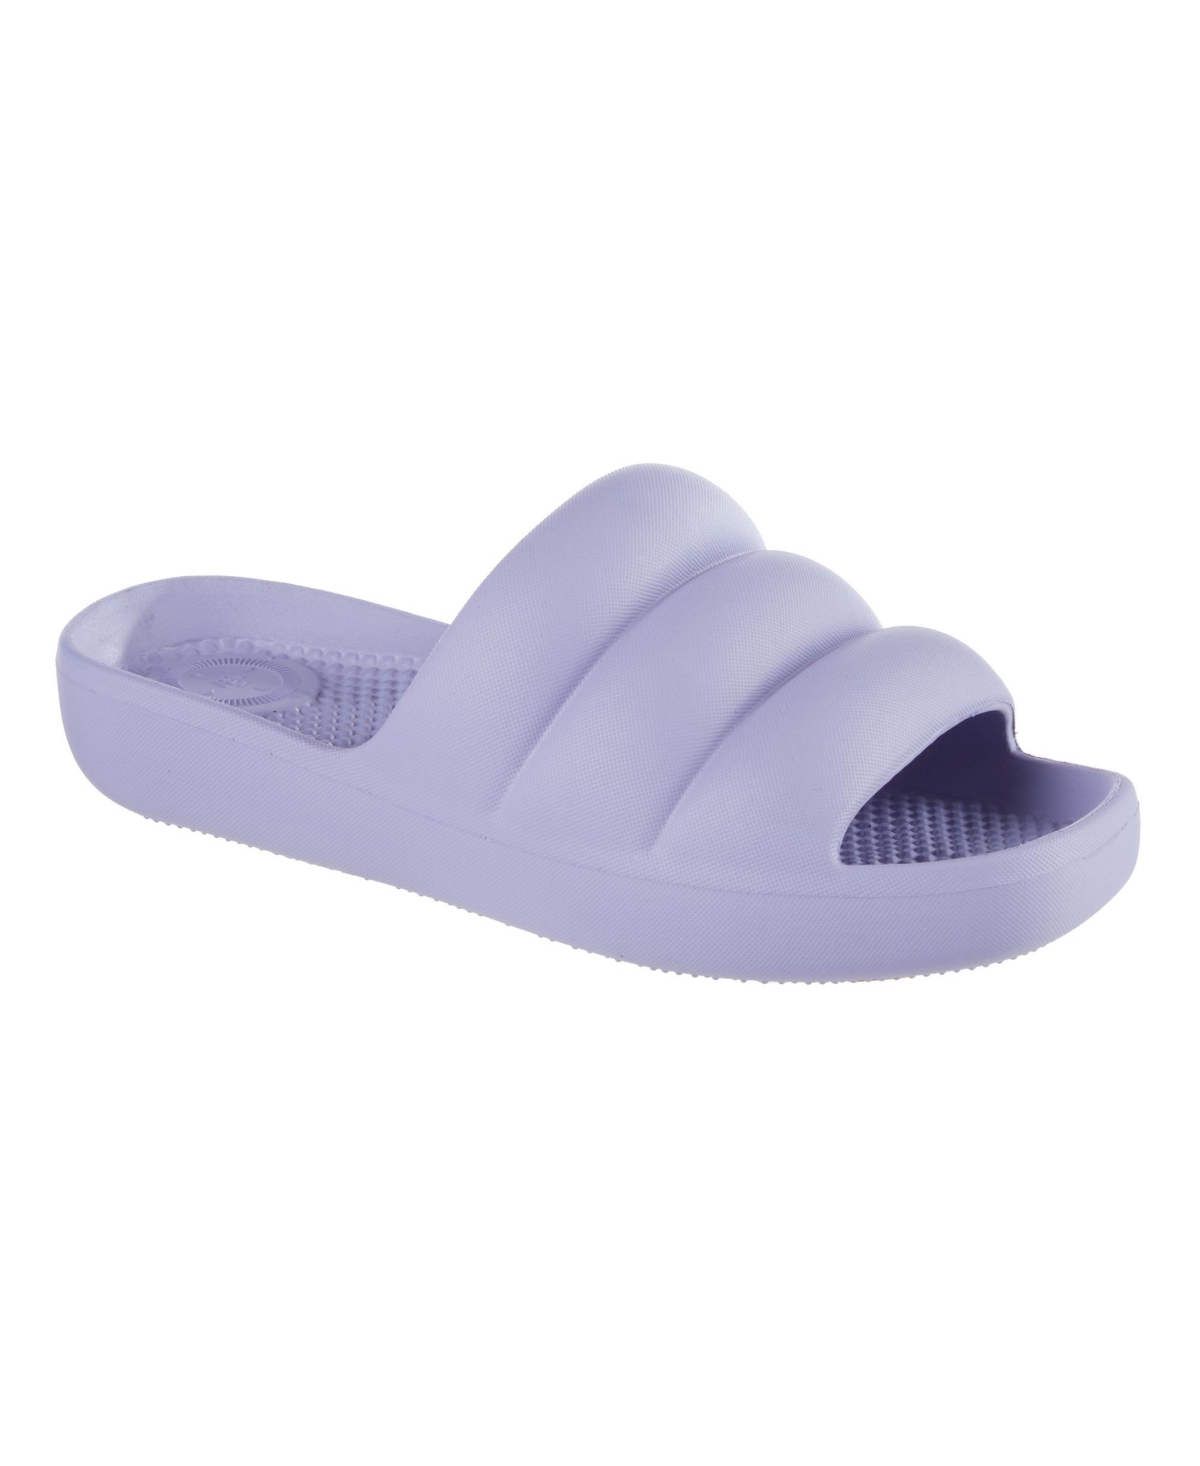 Totes Women's Molded Puffy Slide With Everywear In Periwinkle